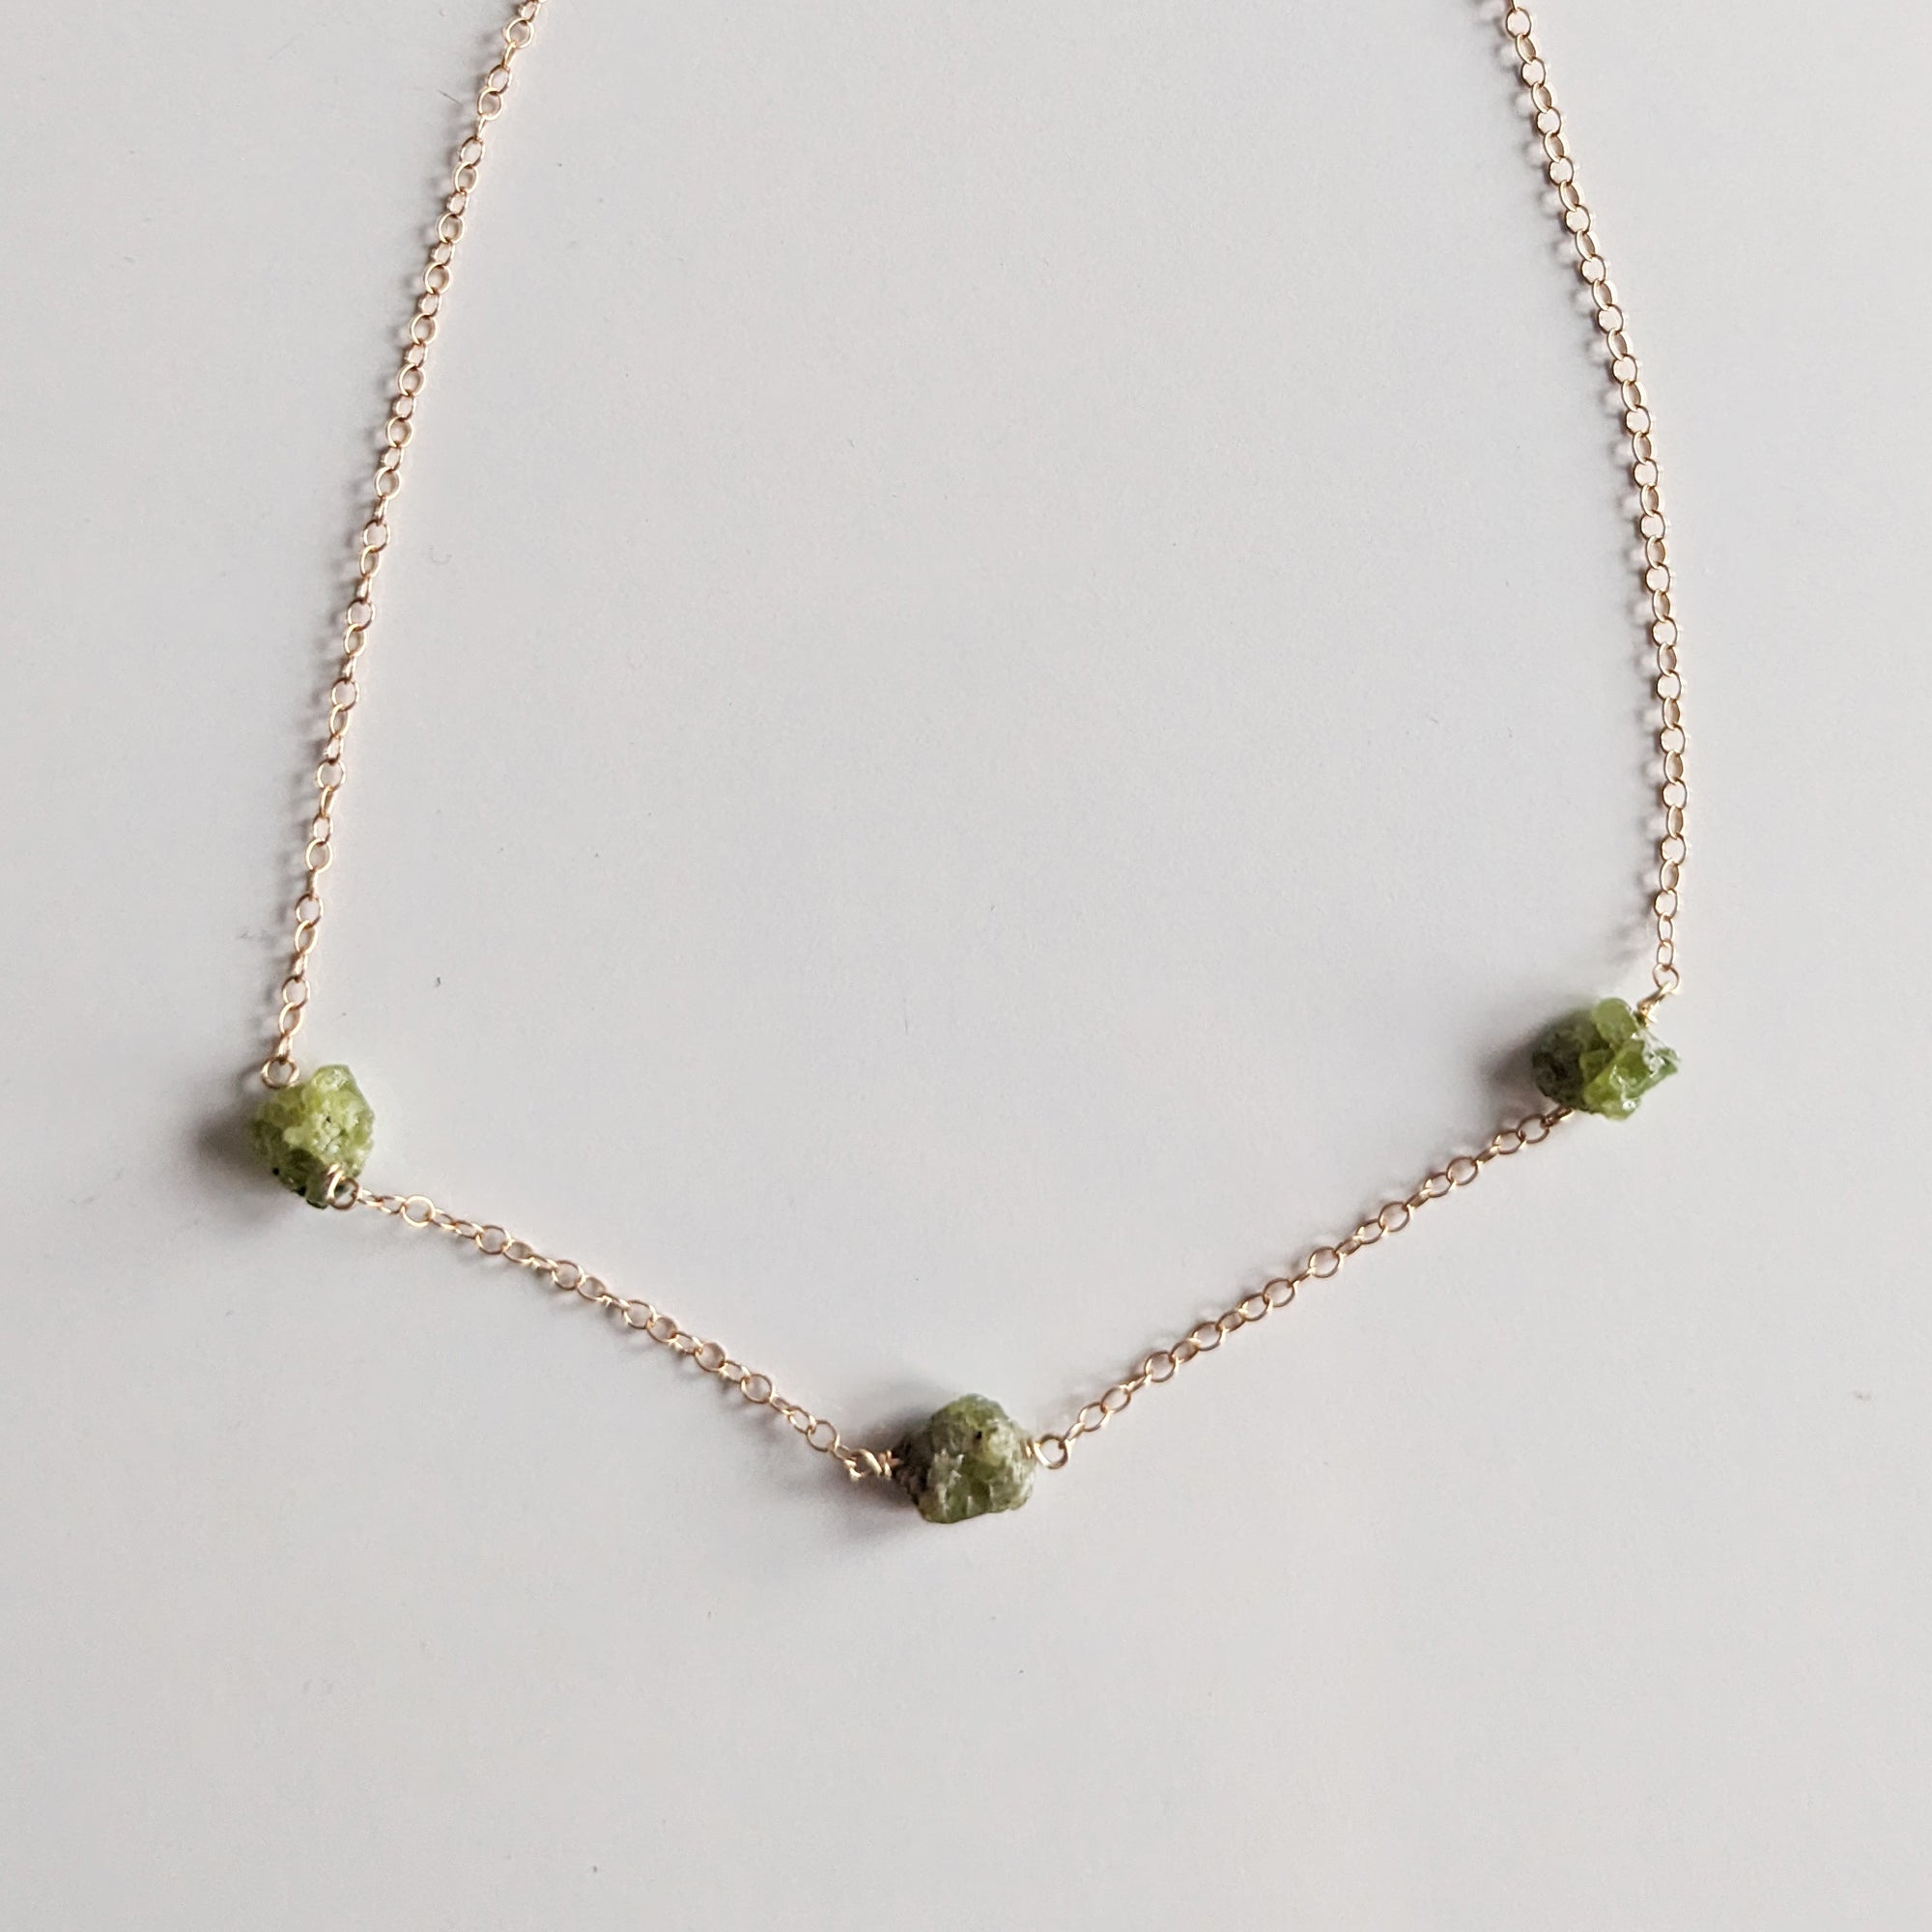 The Rough Peridot Necklace